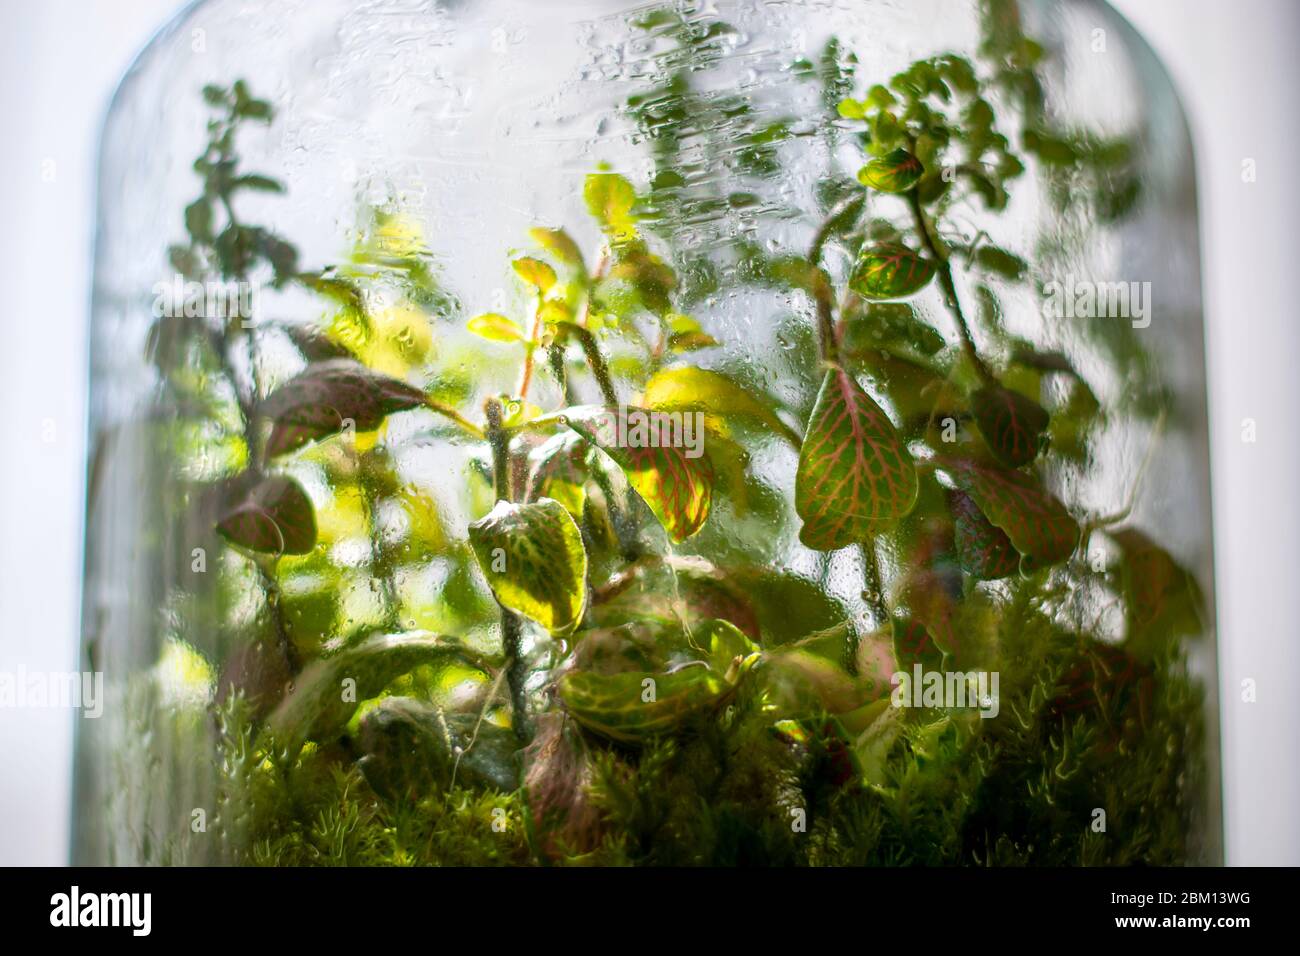 Plants in a closed glass bottle. Terrarium jar small ecosystem. Moisture condenses on the inside of the glass. The process of photosynthesis. Droplets Stock Photo